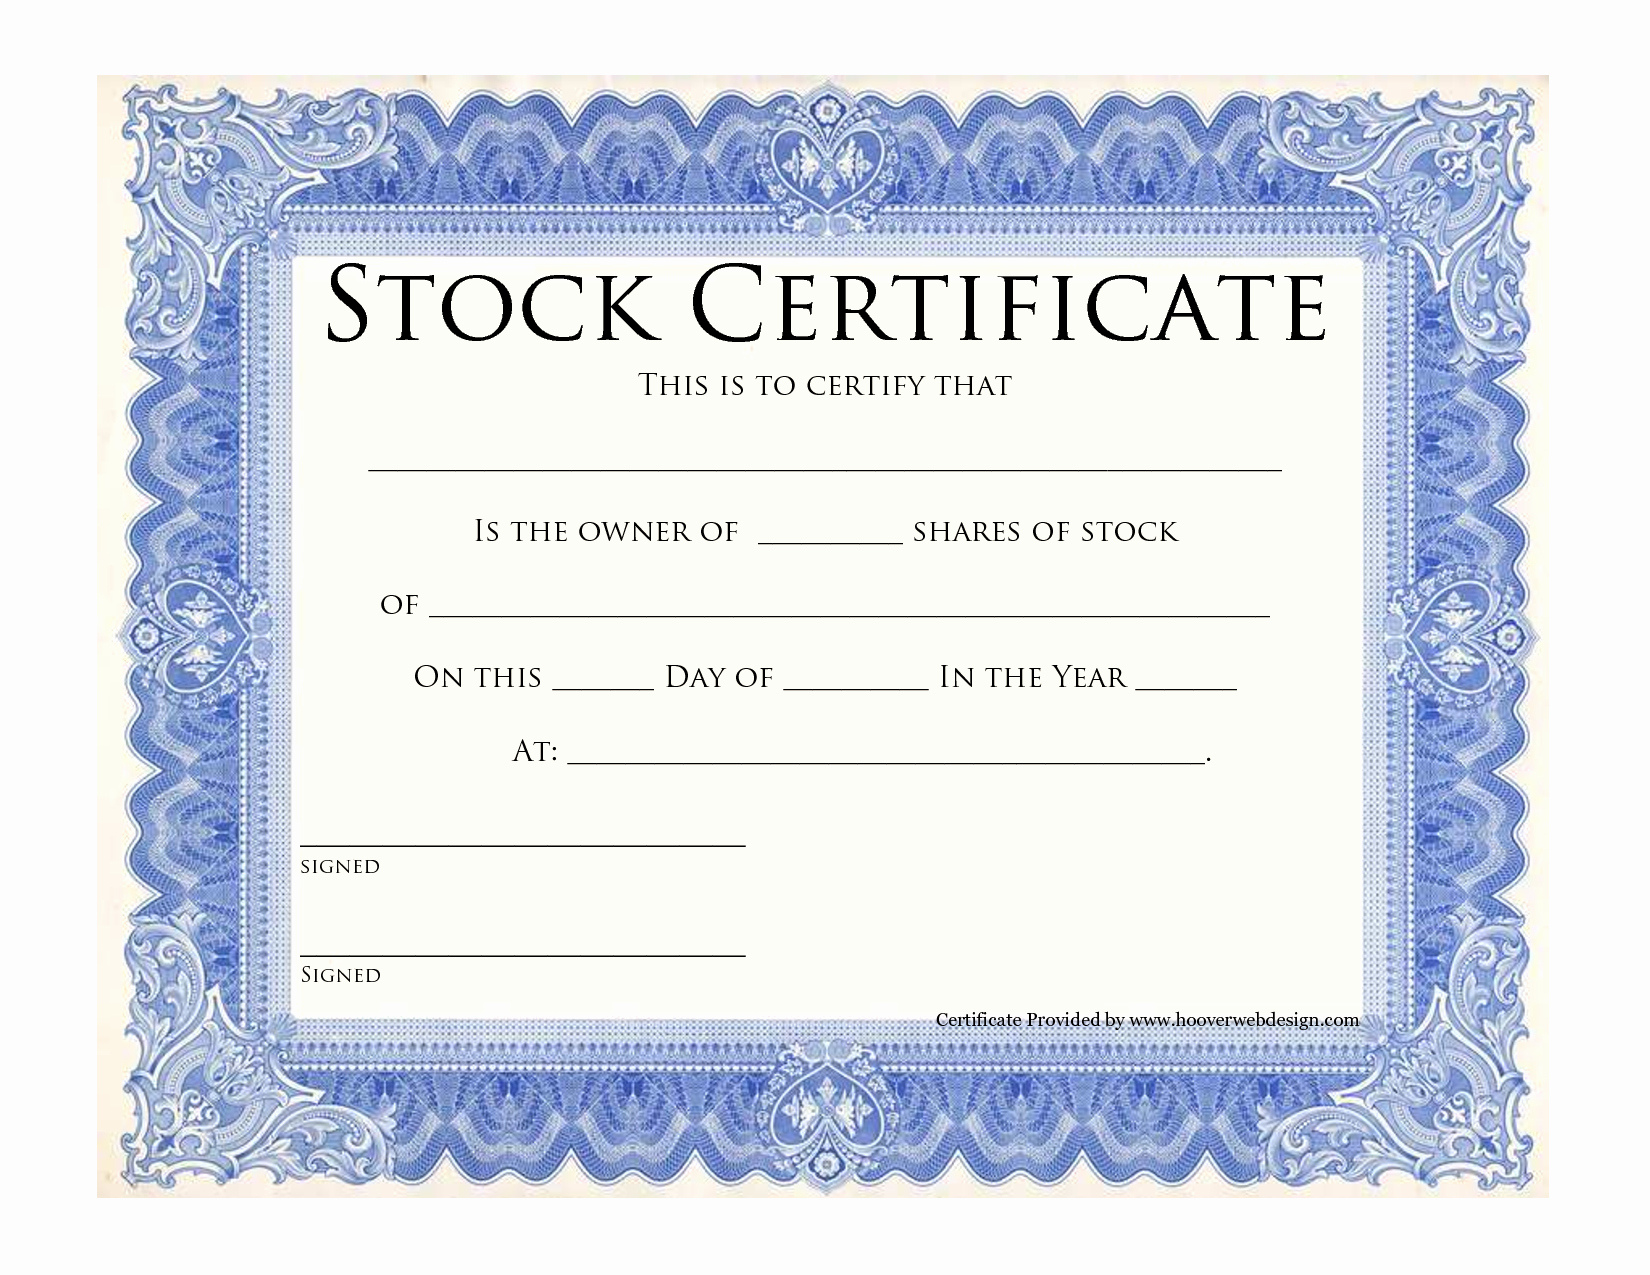 Corporate Stock Certificate Template Lovely why Private Panies Don T Need to issue Stock